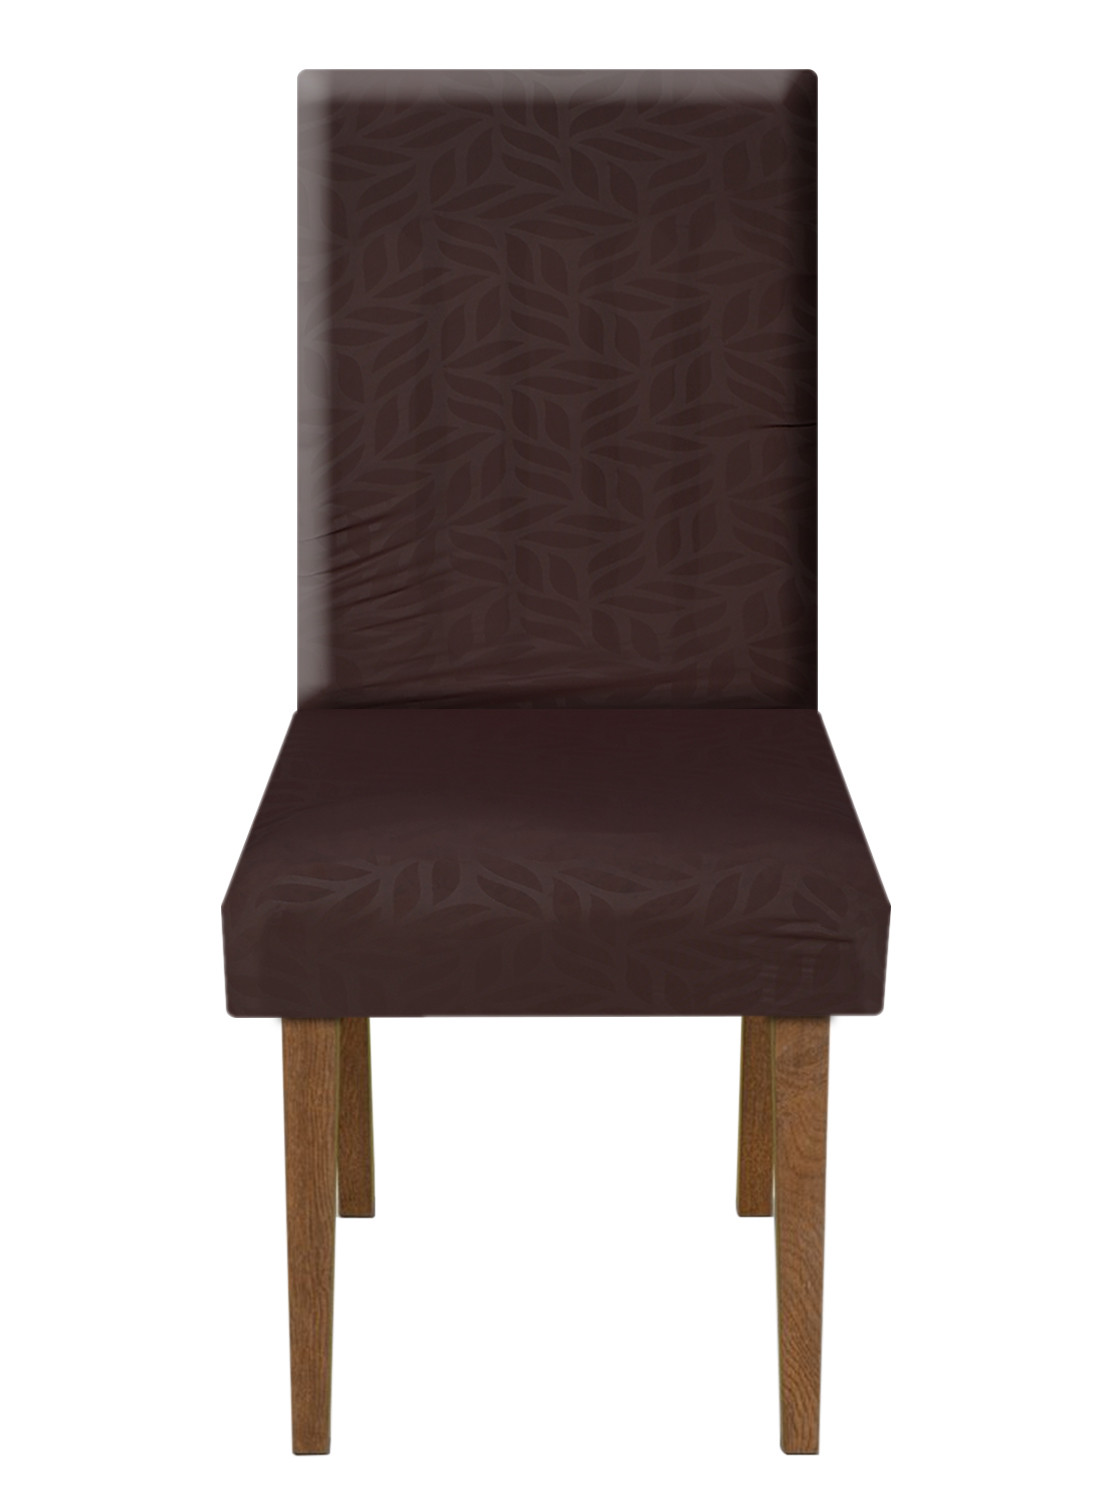 Kuber Industries Leaf Printed Elastic Stretchable Polyster Chair Cover For Home, Office, Hotels, Wedding Banquet (Brown)